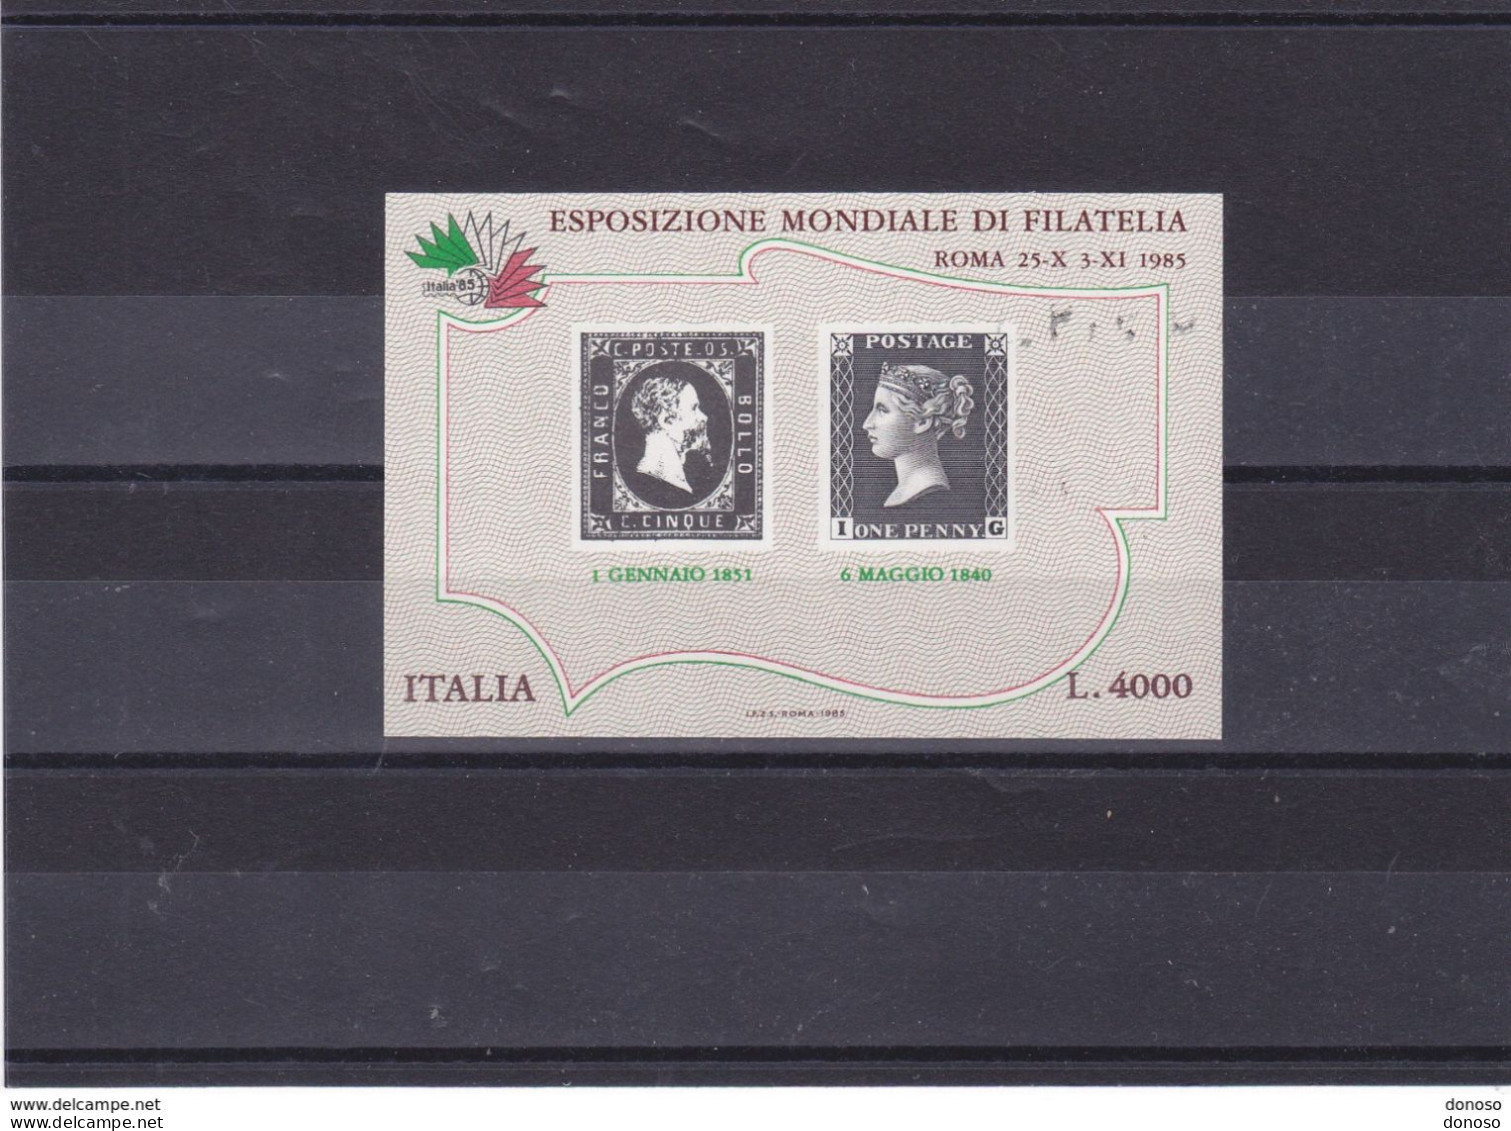 ITALIE 1985 TIMBRES SUR TIMBRES ITALIA 85 Yvert BF 3, Michel Bl 1 NEUF** MNH Cote Yv: 8 Euros - 1981-90: Neufs